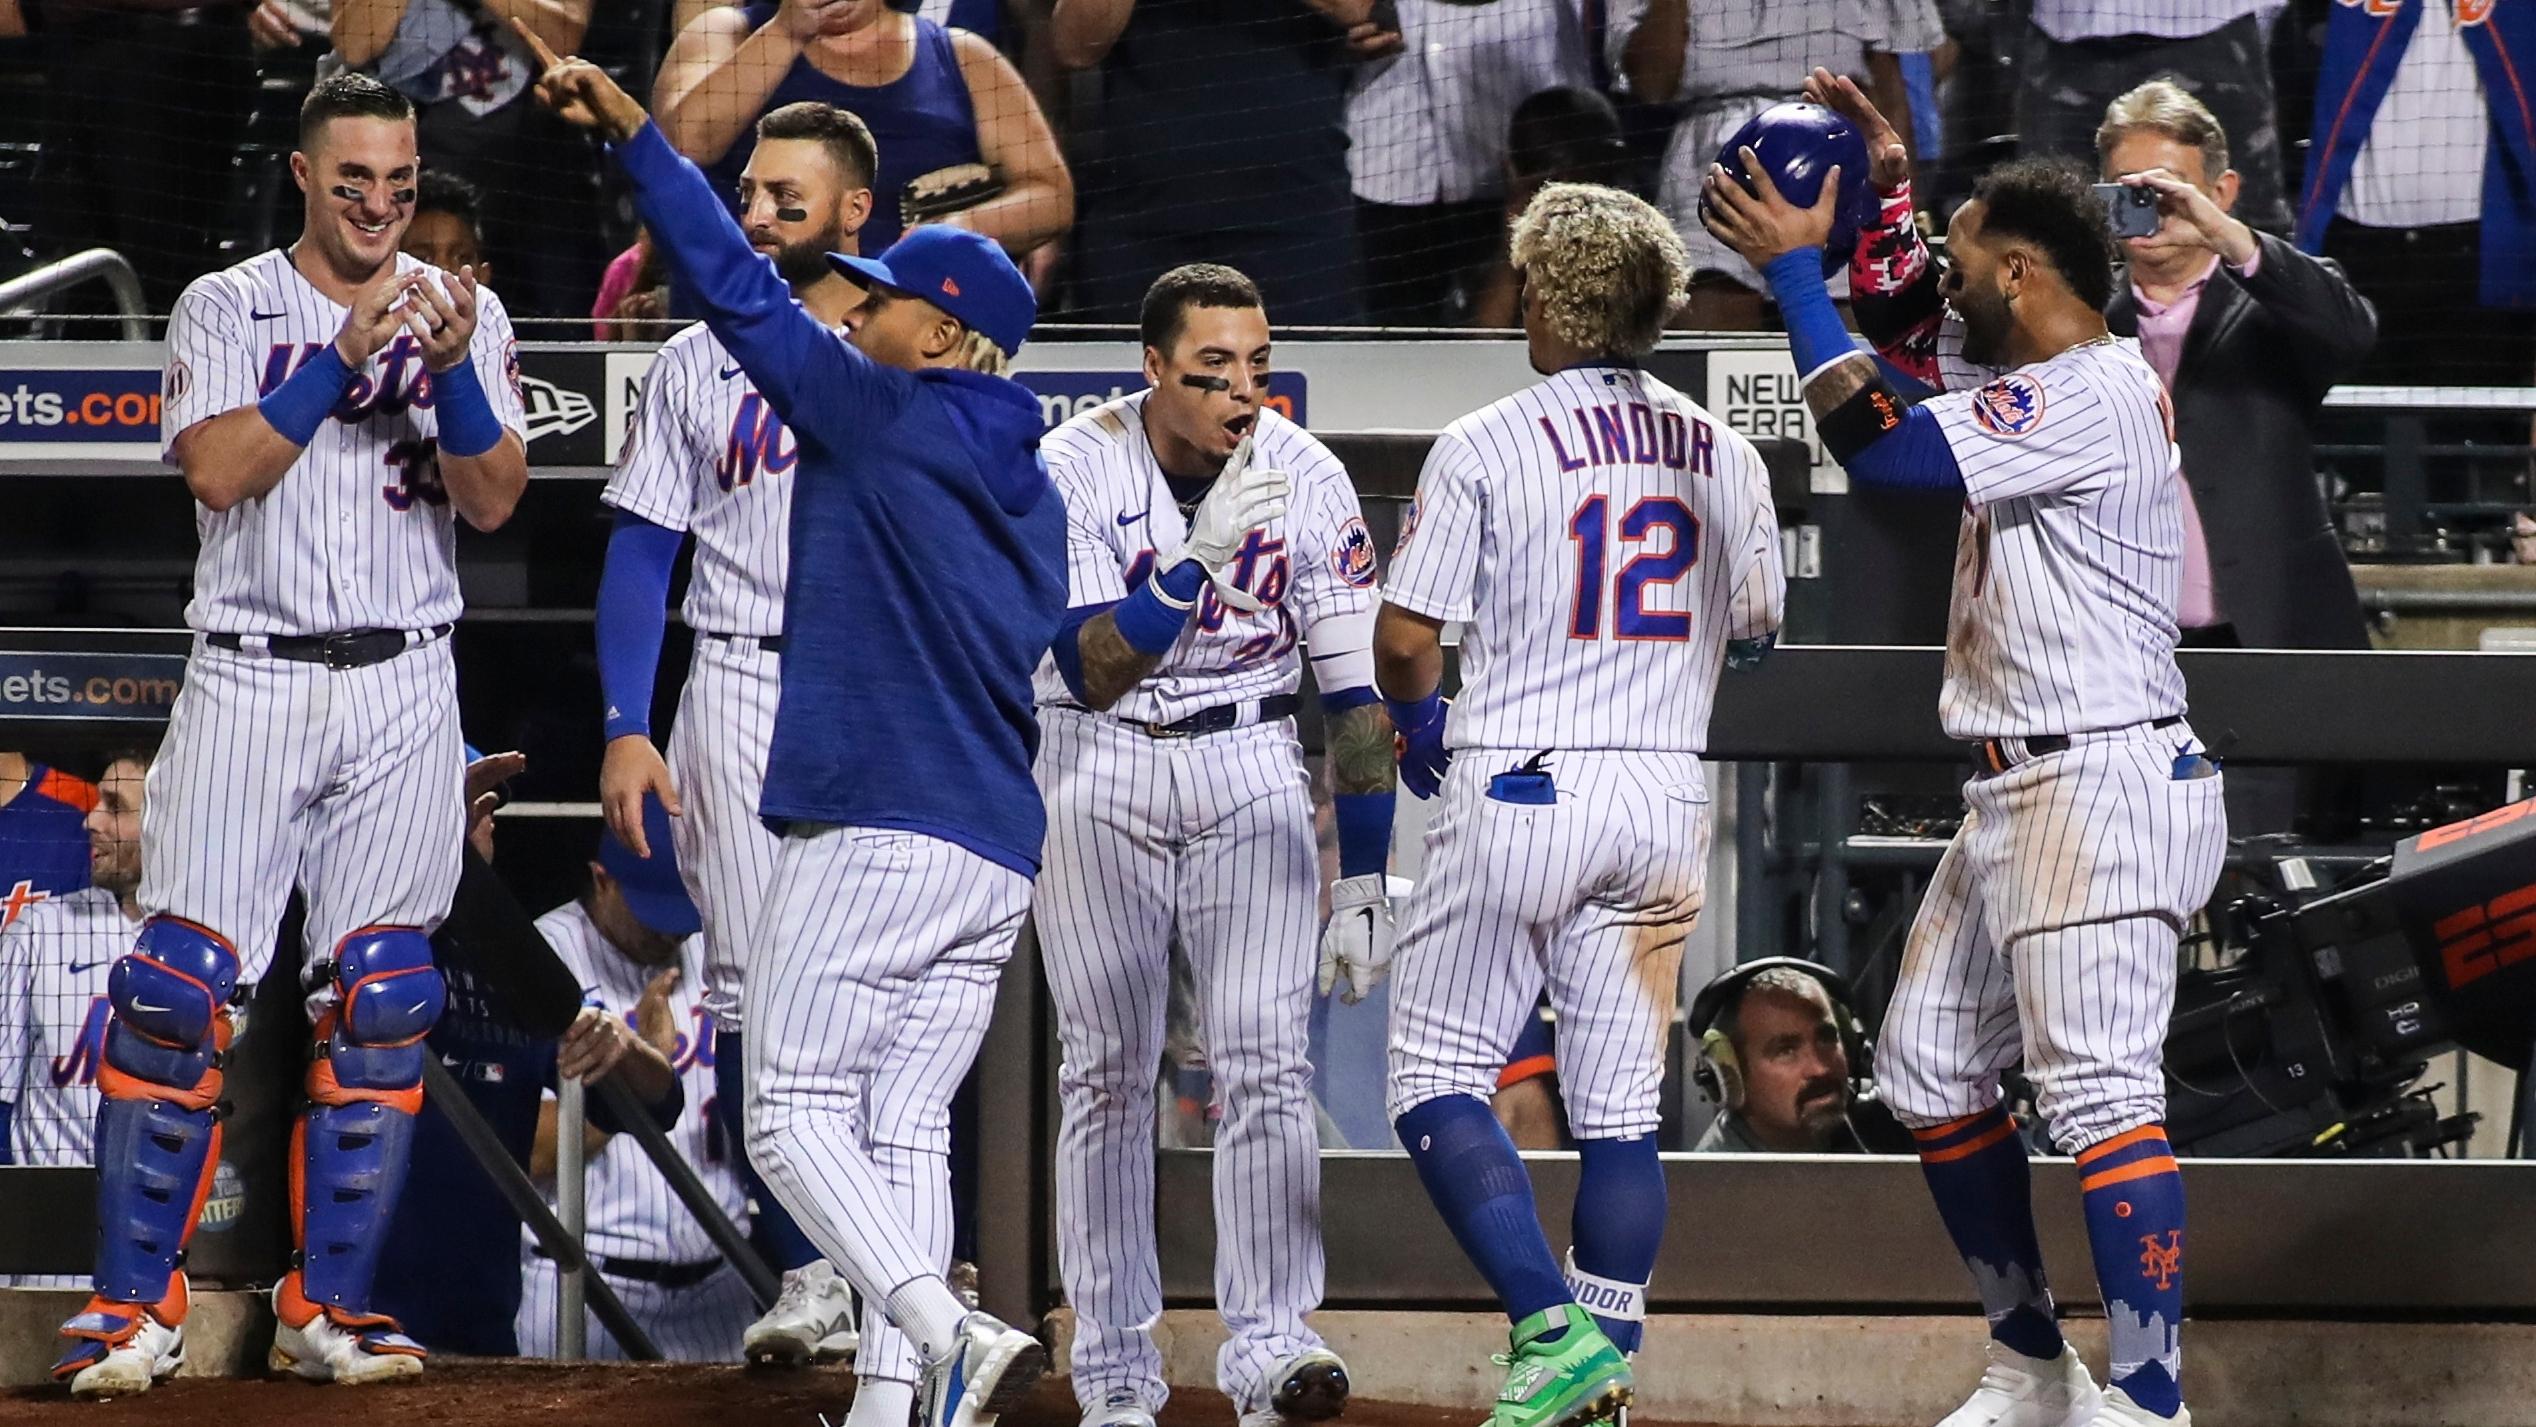 Sep 12, 2021; New York City, New York, USA; New York Mets shortstop Francisco Lindor (12) is greeted by his teammates after hitting his third home run of the game in the eighth inning against the New York Yankees at Citi Field. / Wendell Cruz-USA TODAY Sports